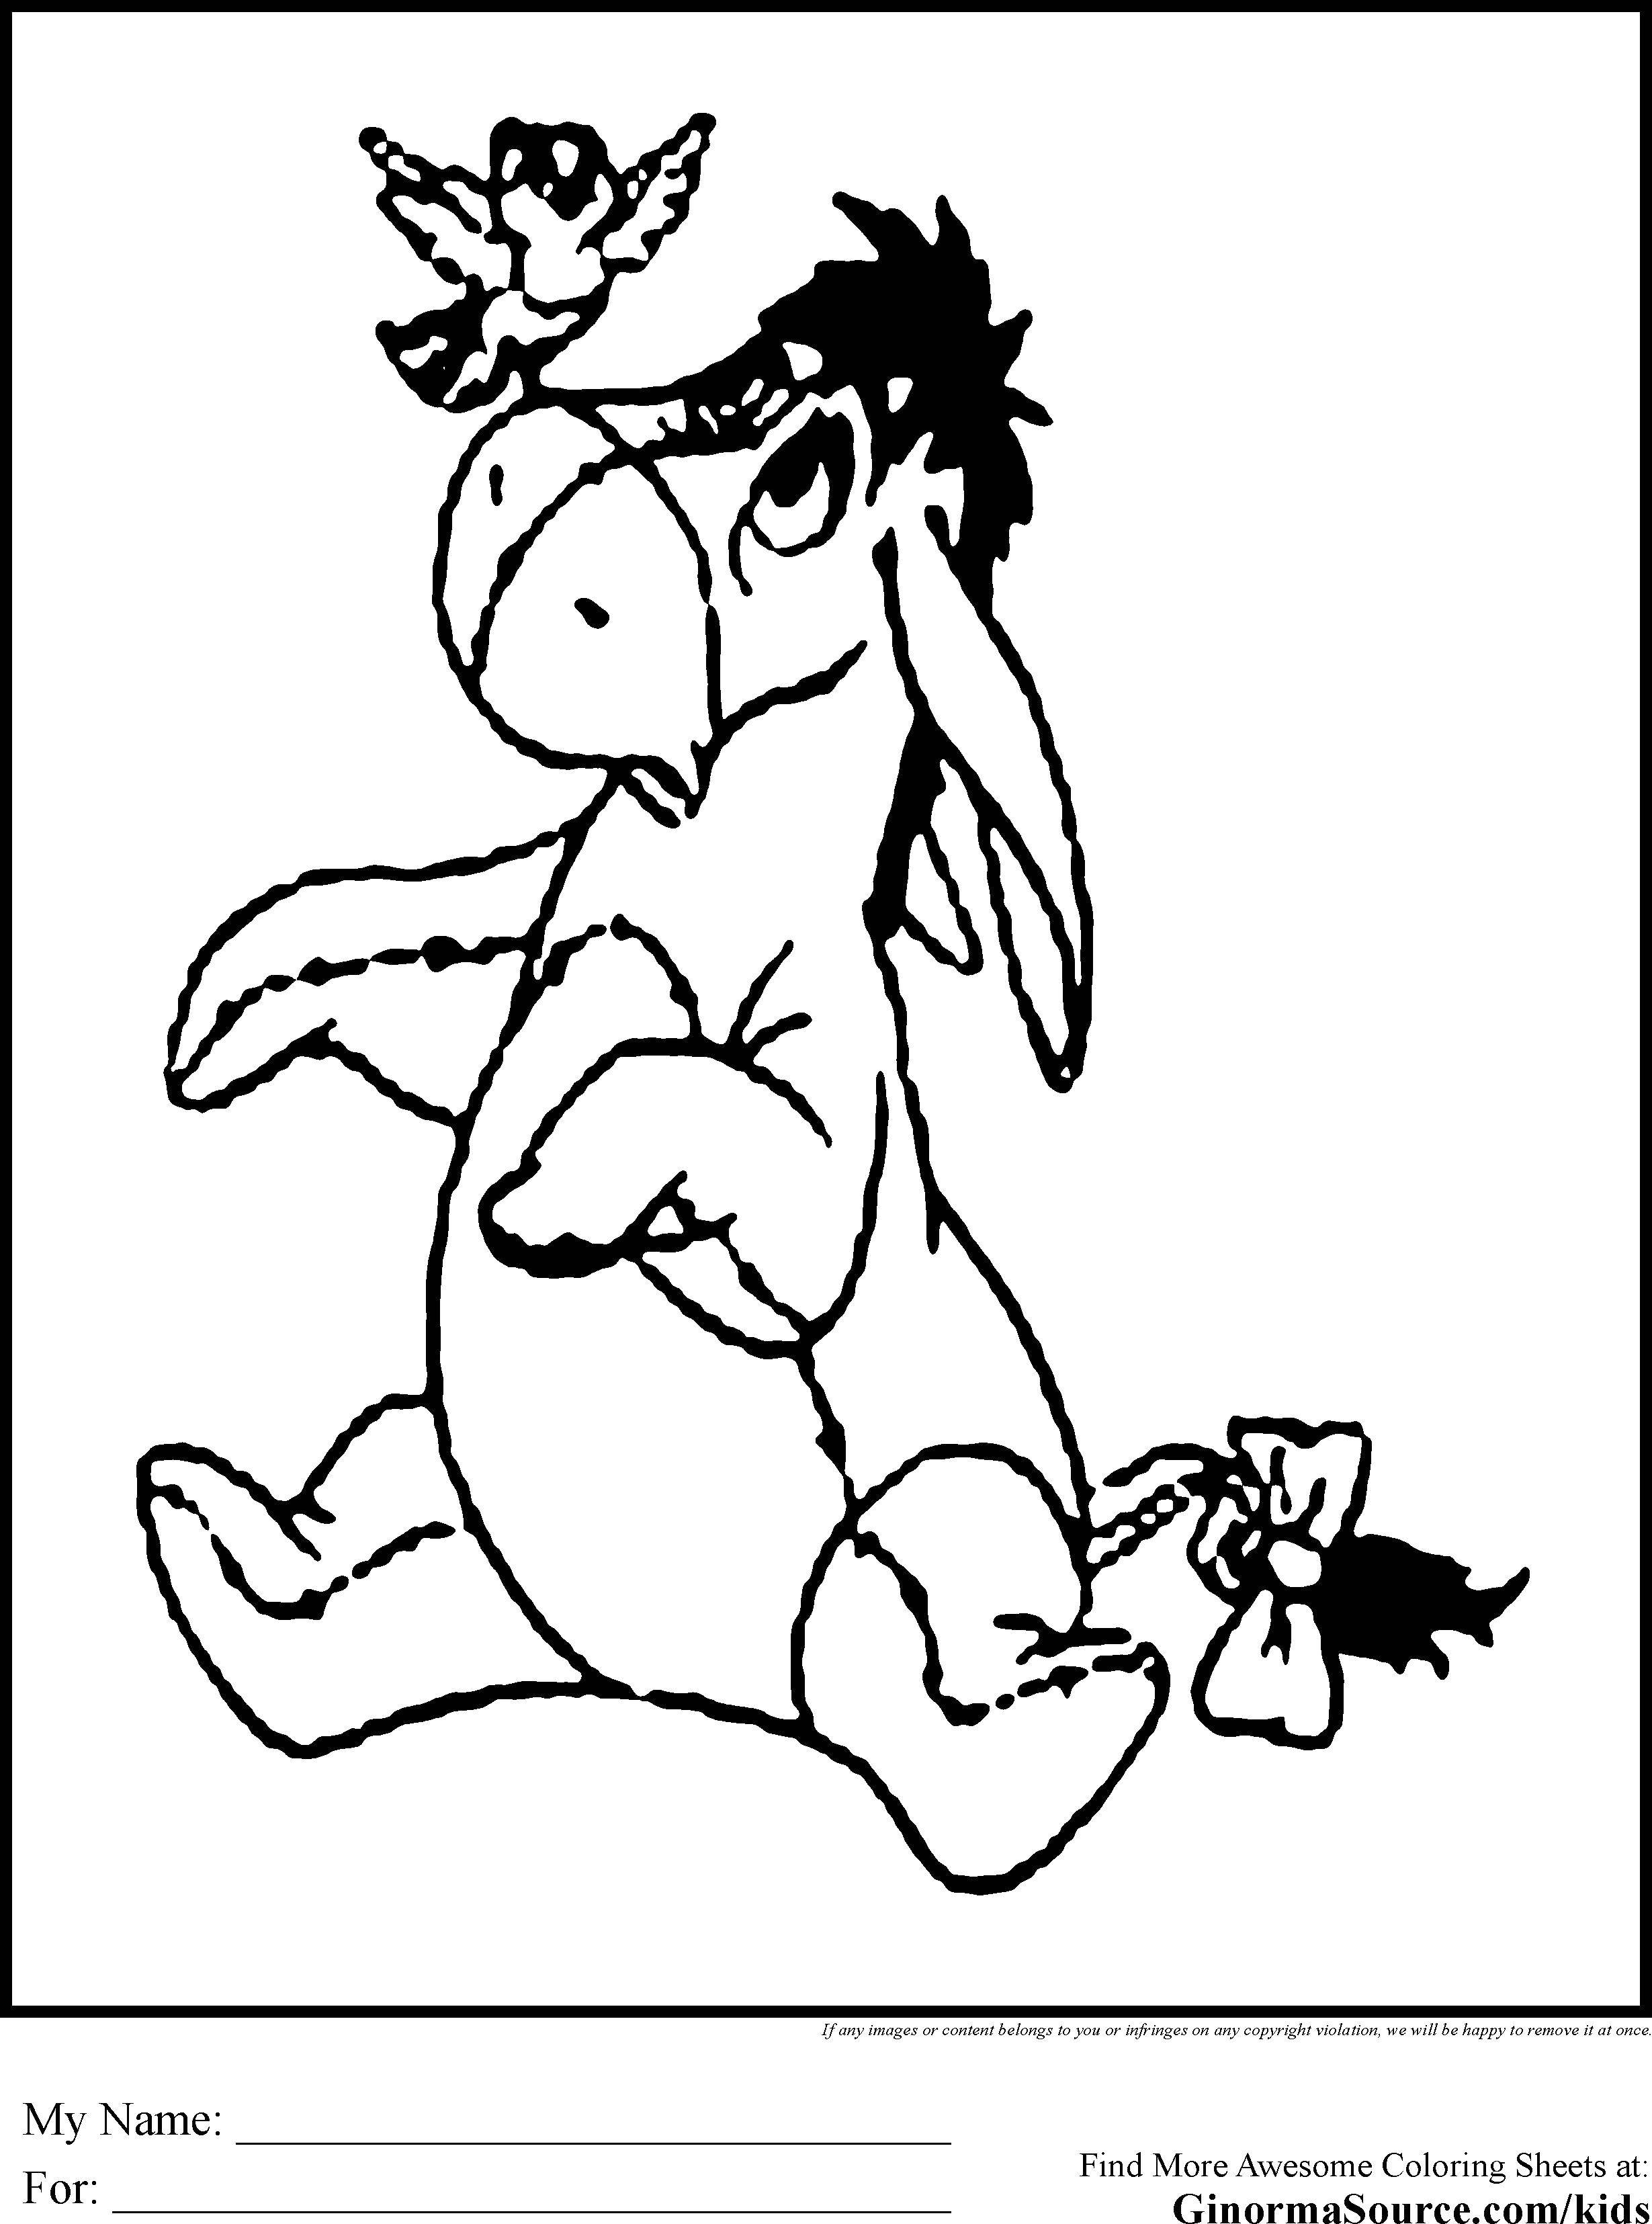 Coloring Donkey Eeyore ia and the bird. Category Winnie the Pooh. Tags:  donkey , bird, tail.